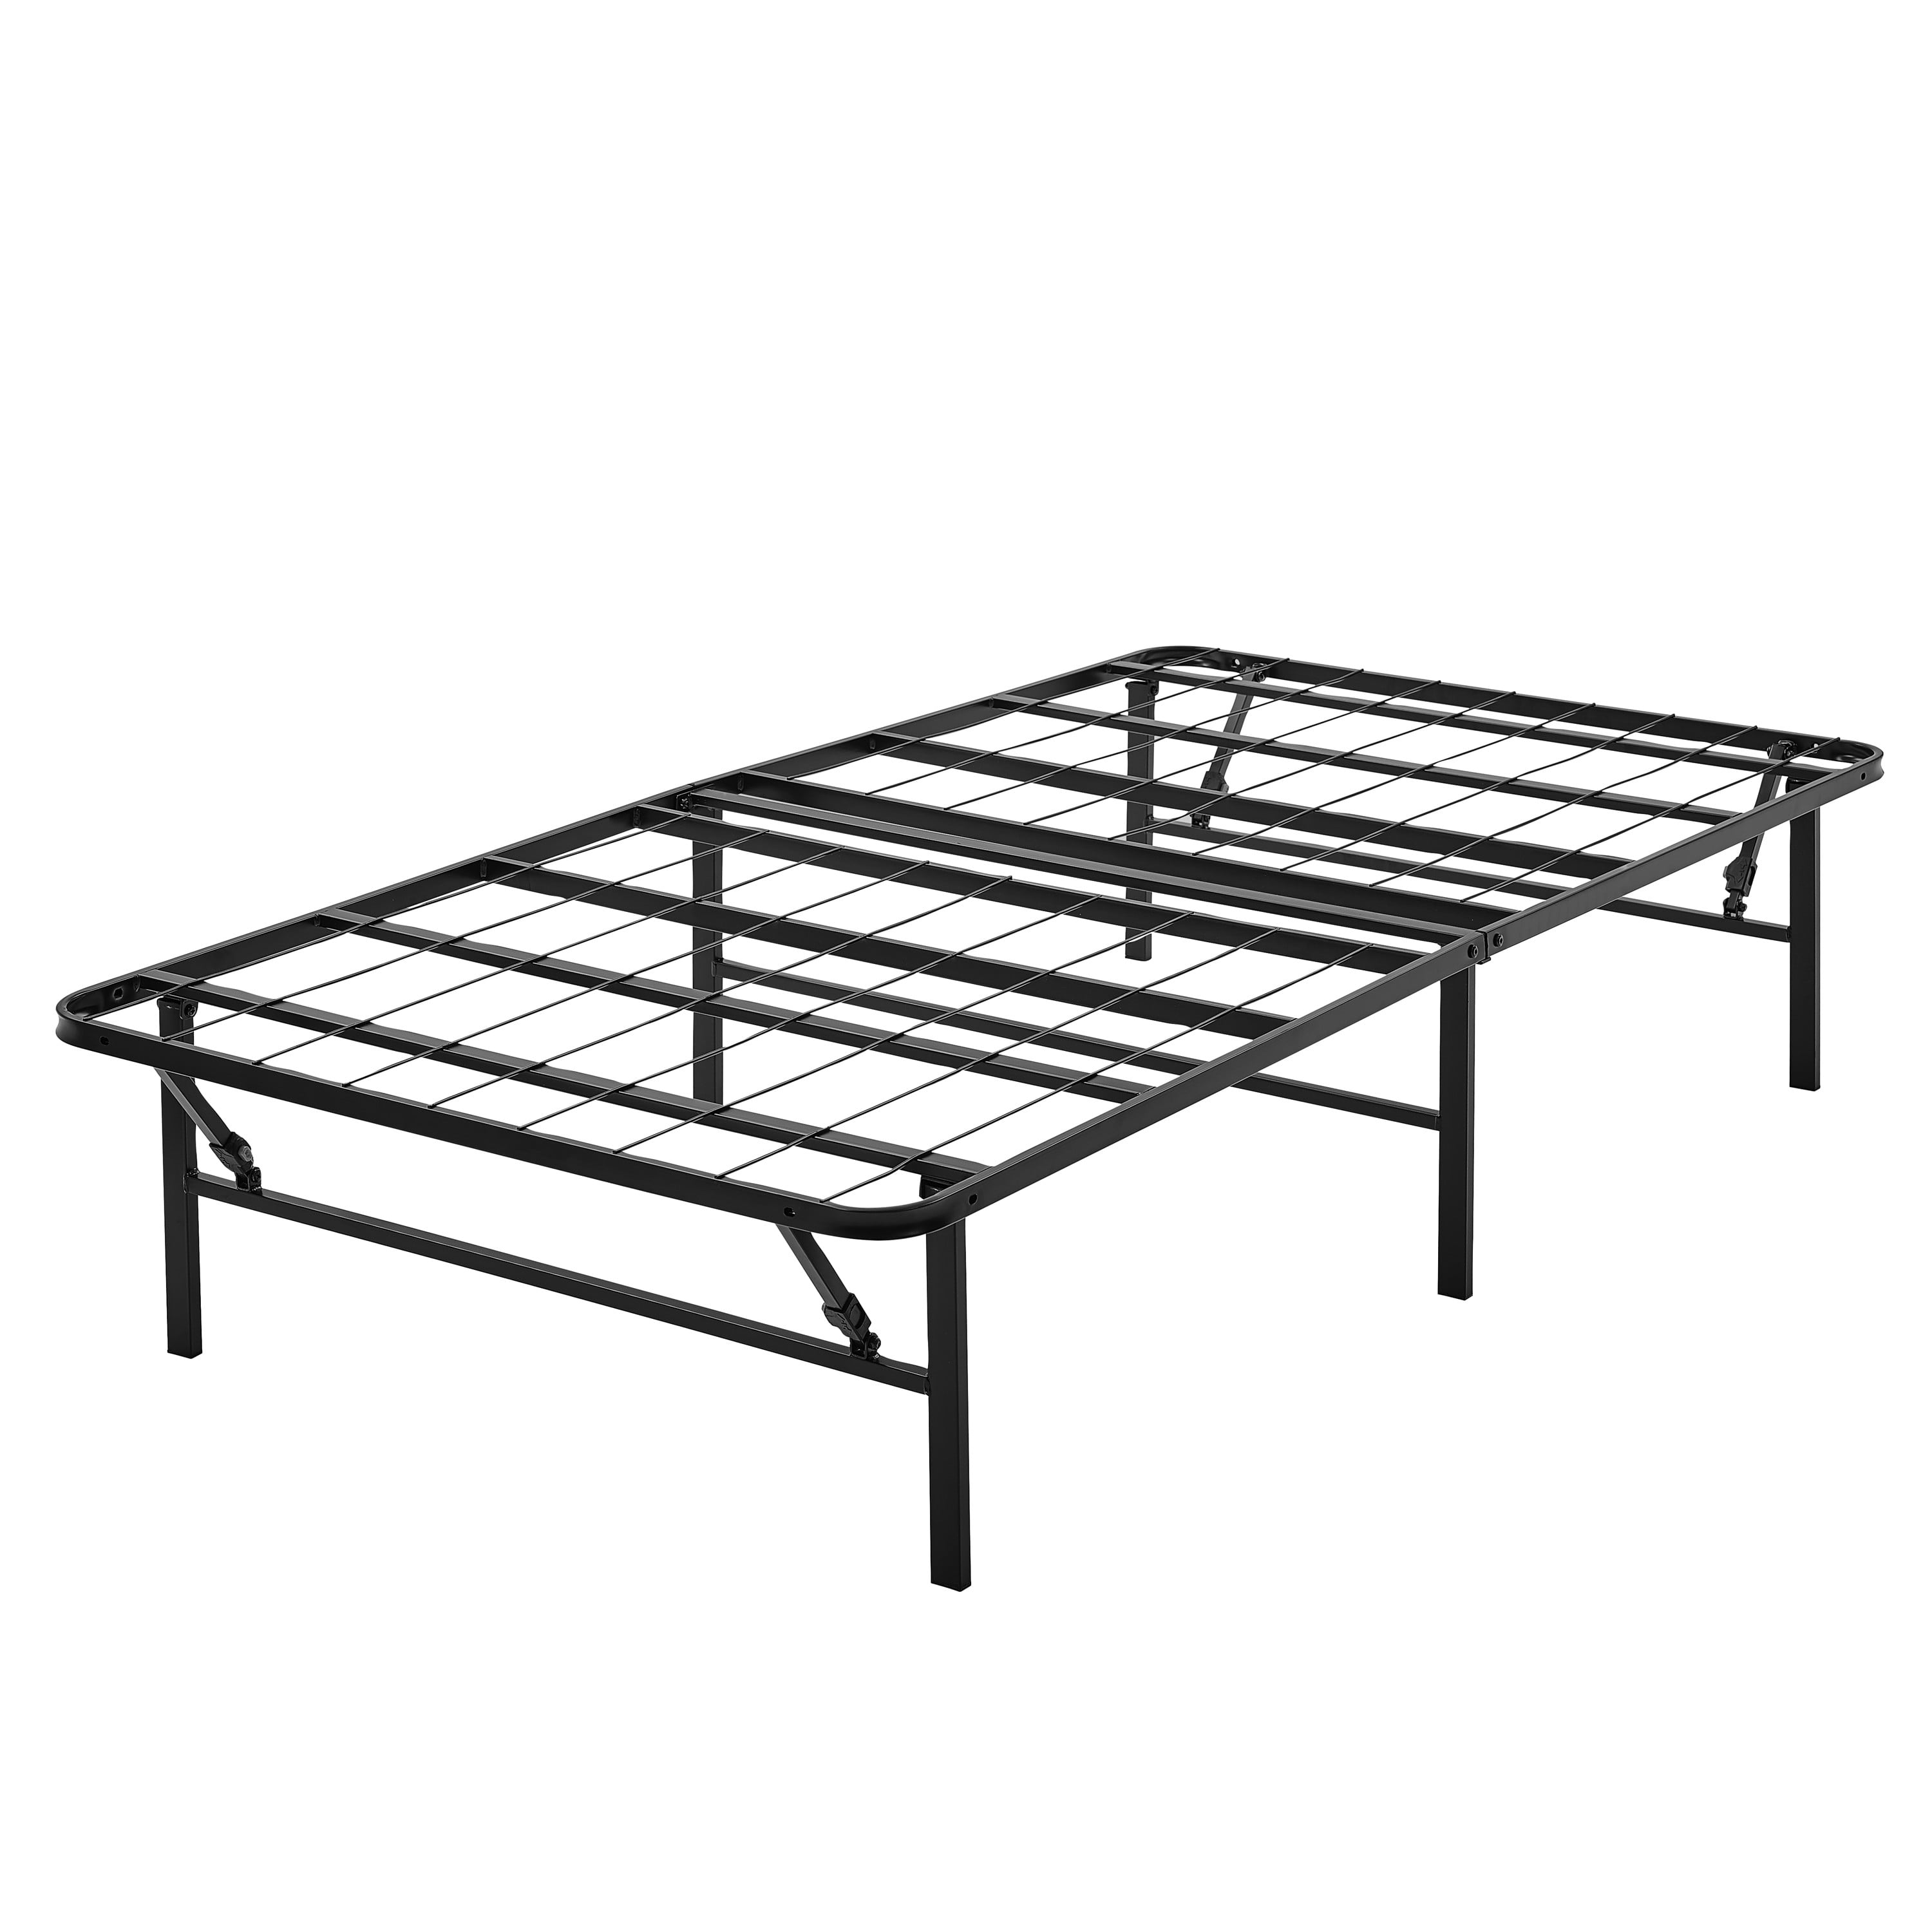 Mainstays 14" High Profile Foldable Steel Bed Frame, Powder-coated